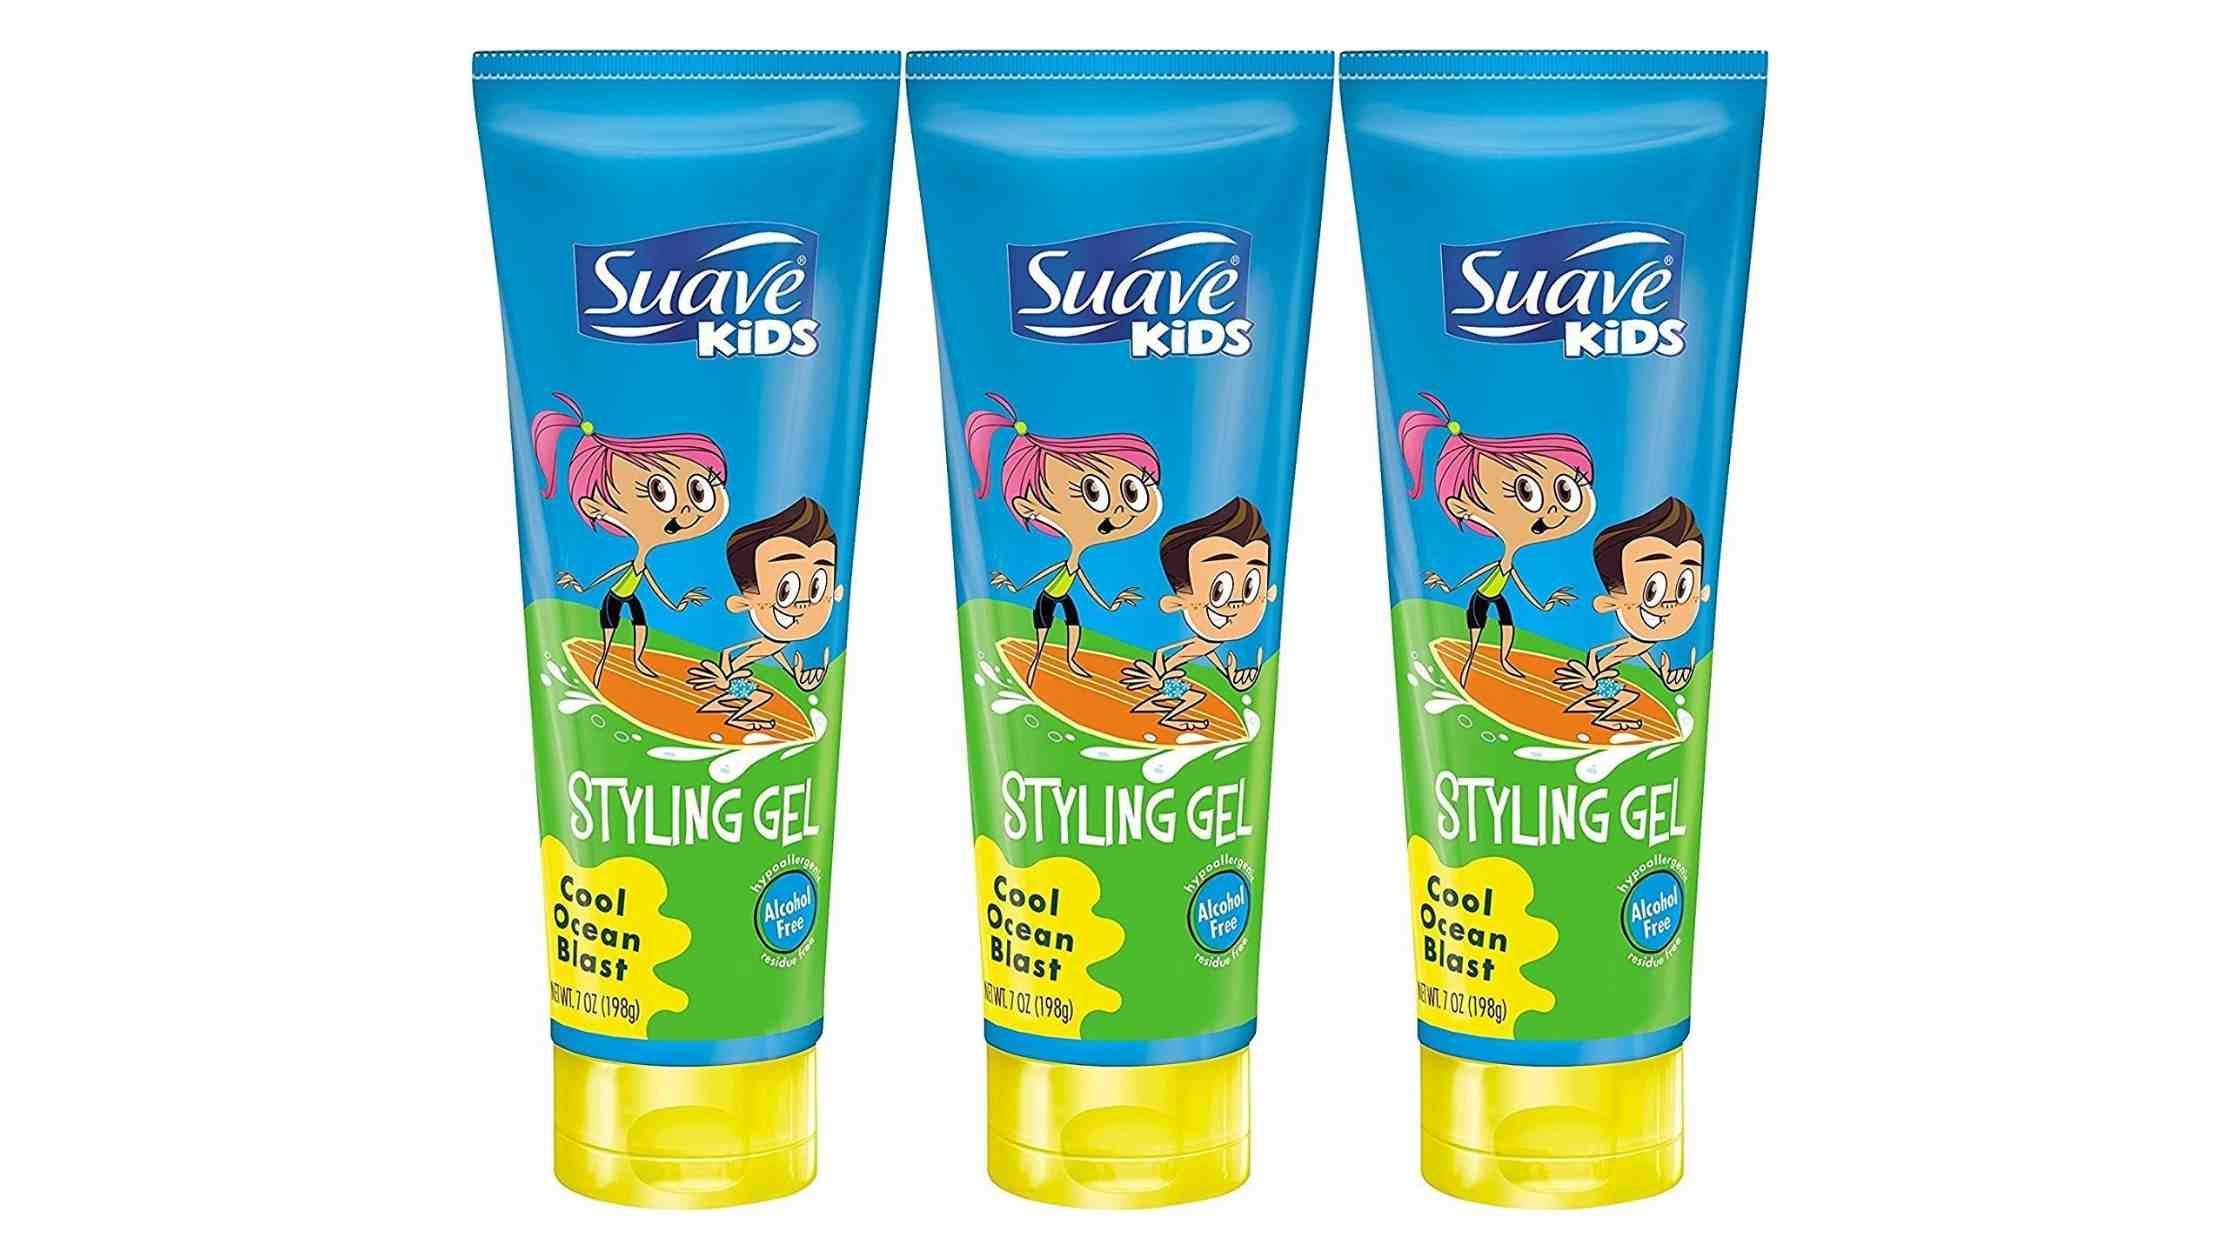 Is Suave Hair Gel discontinued - What company makes it?